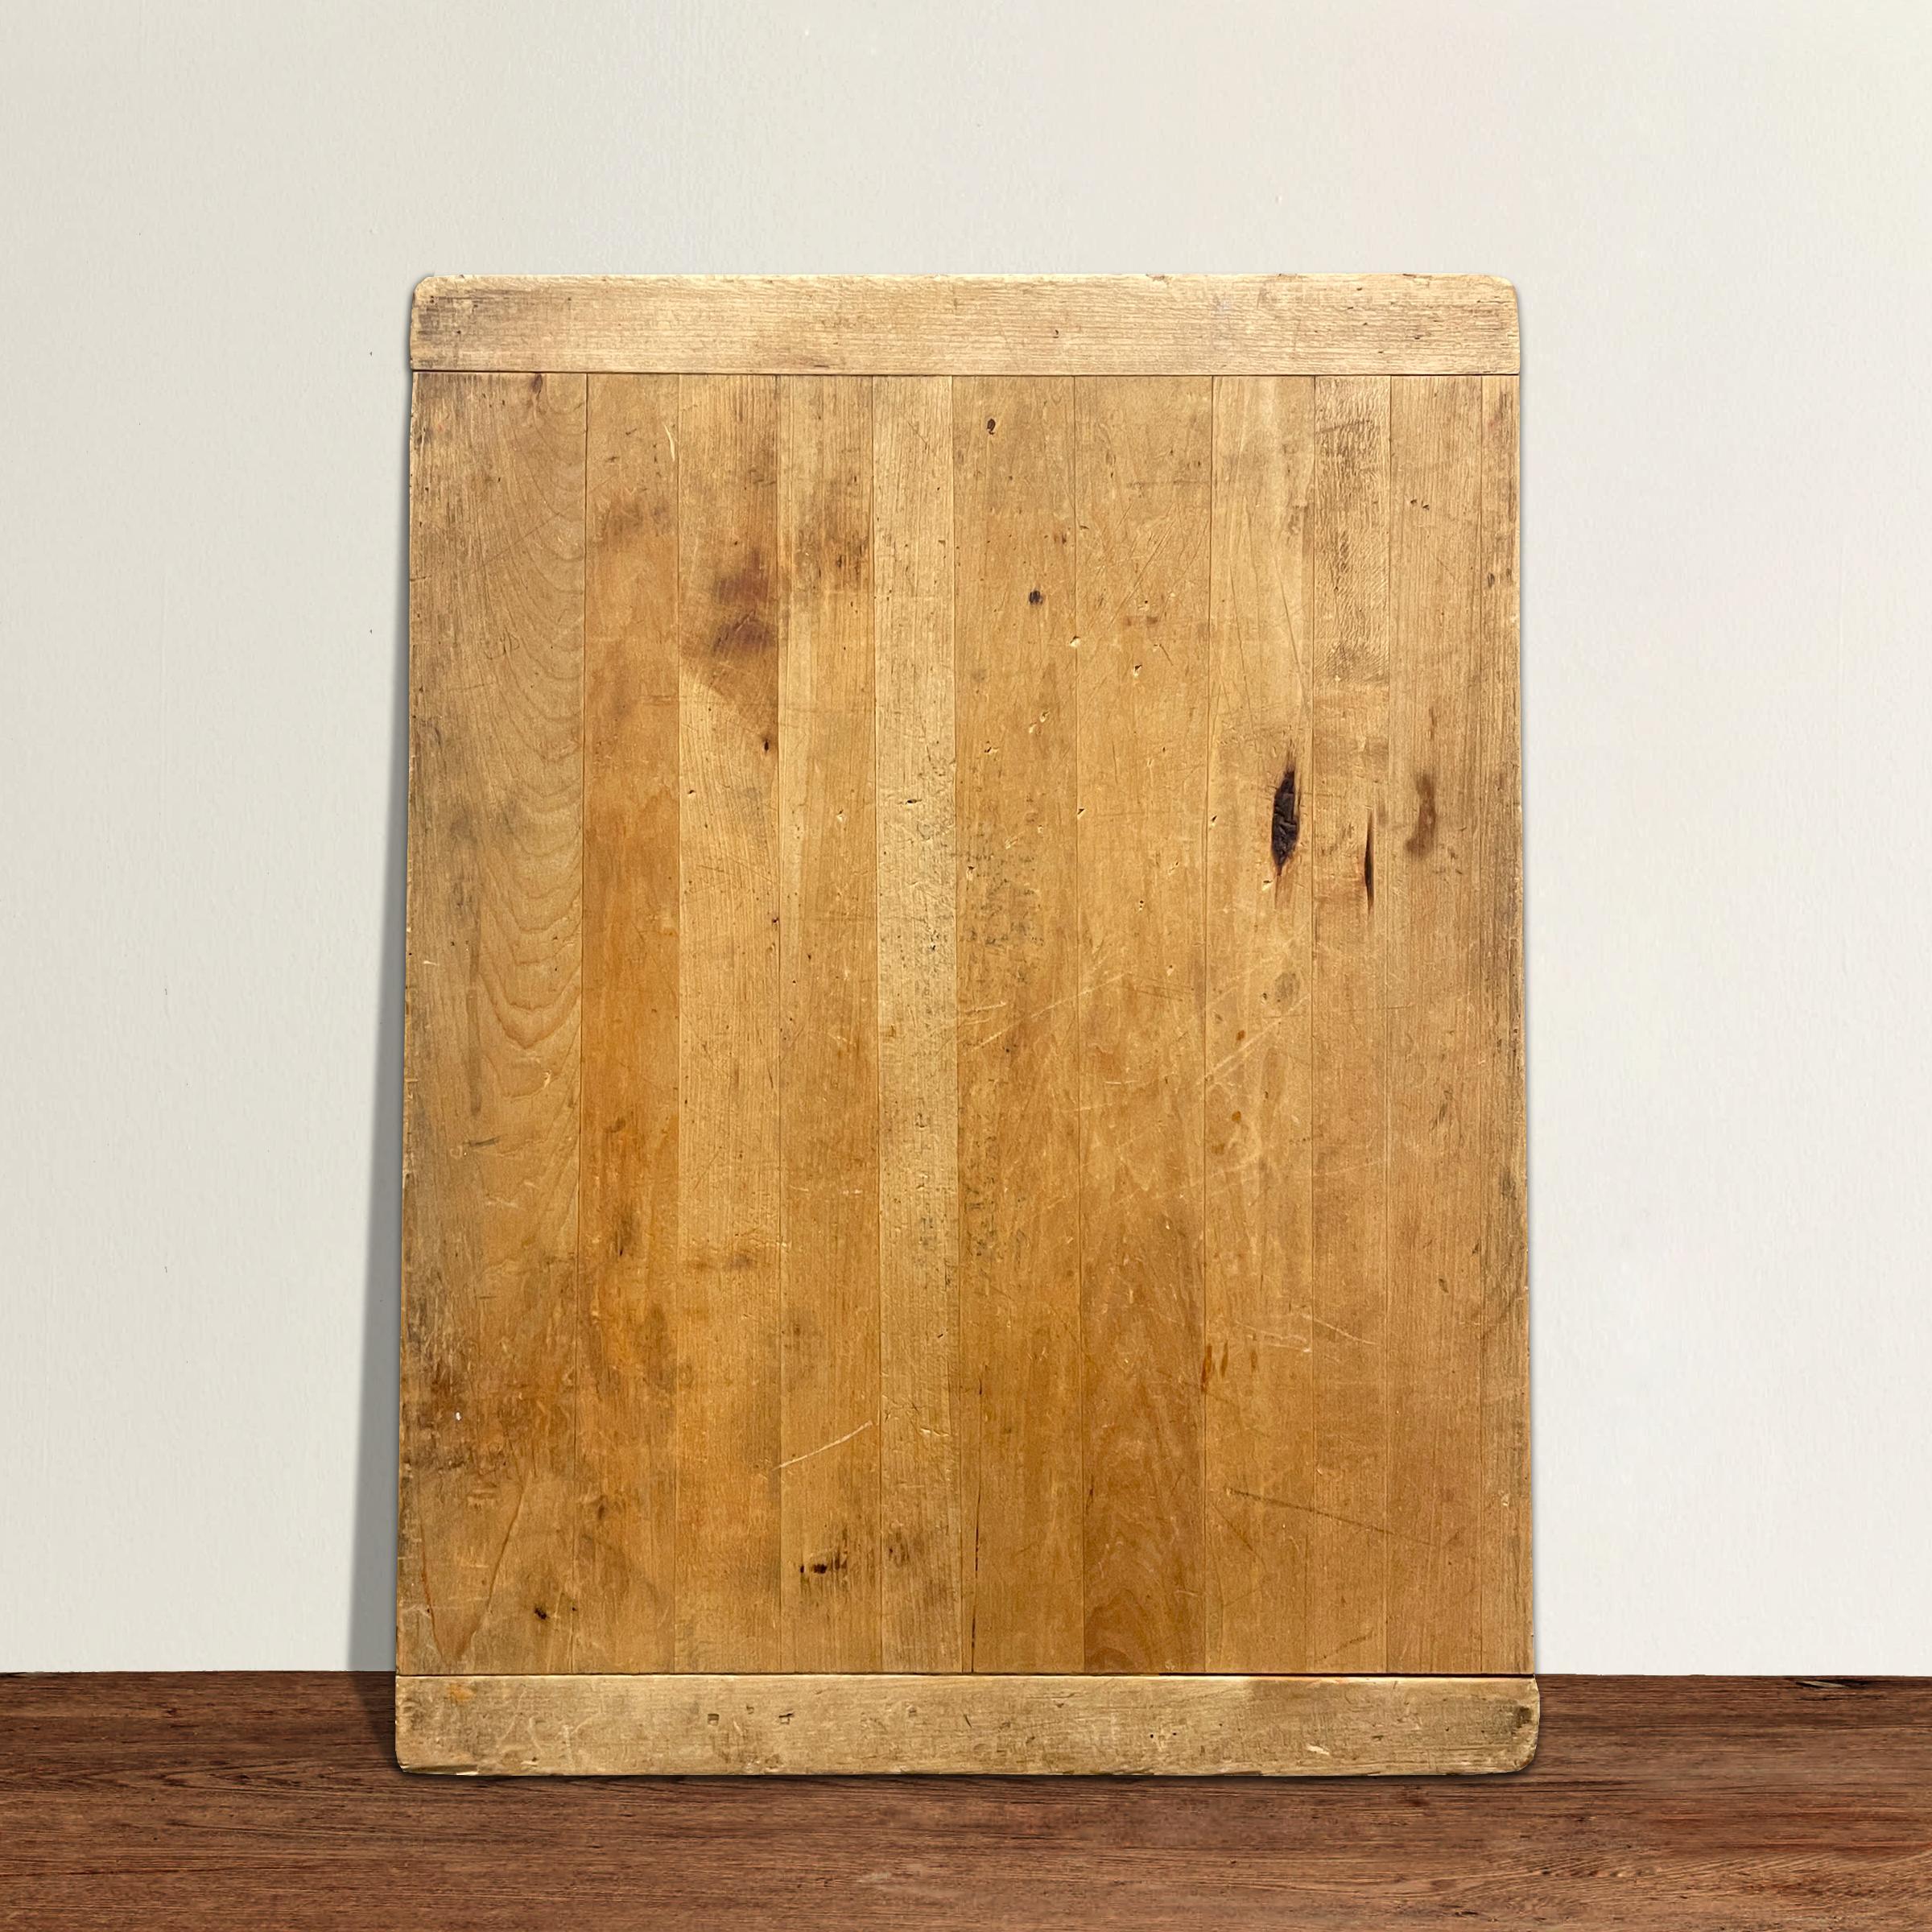 A charming early 20th century American maple breadboard with a wonderful golden patina. Sound and ready for another hundred years of use in your kitchen. Perfect for covering with cheese and charcuterie at your next fête, or piling high with flour